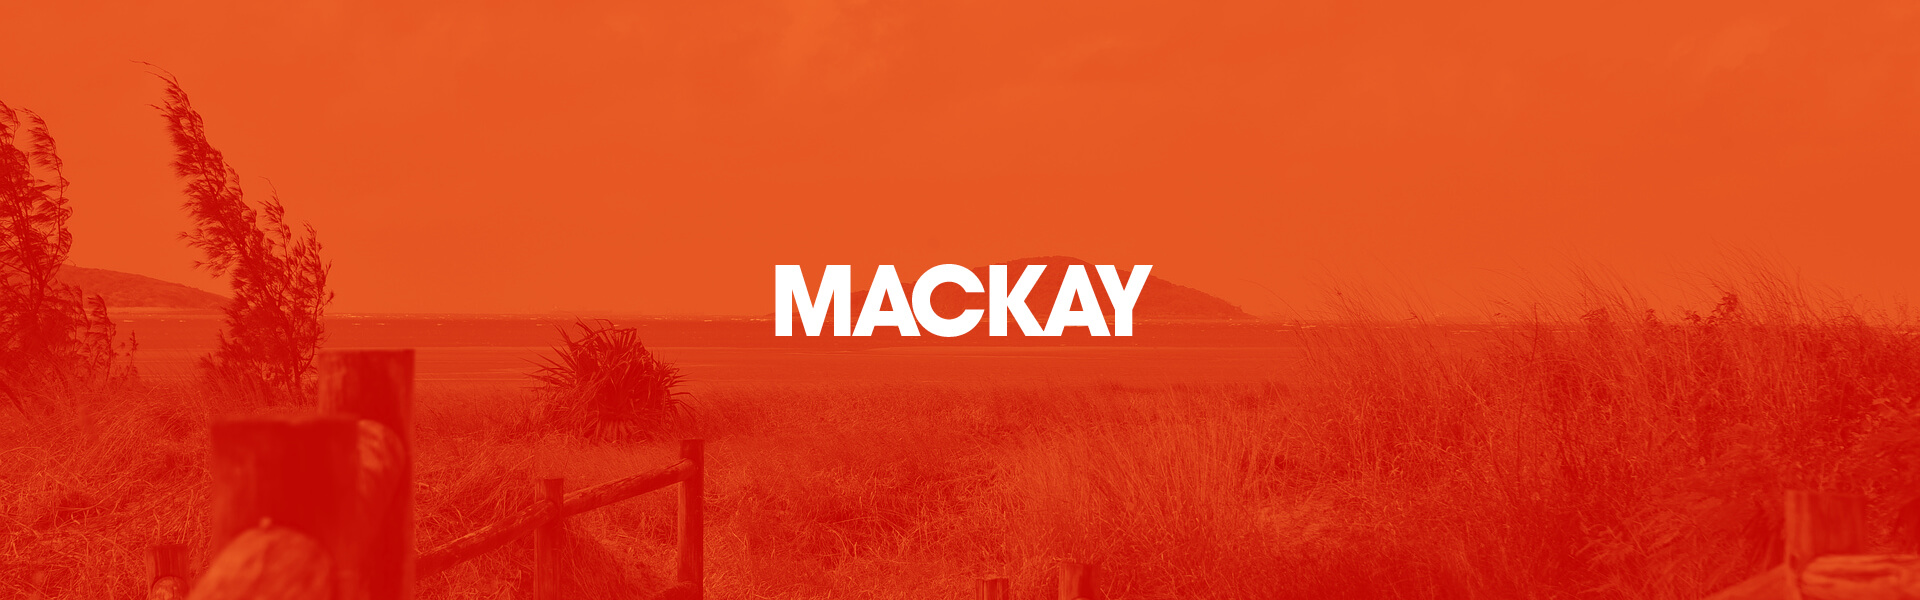 What Mackay Advertising Opportunities Are Available?